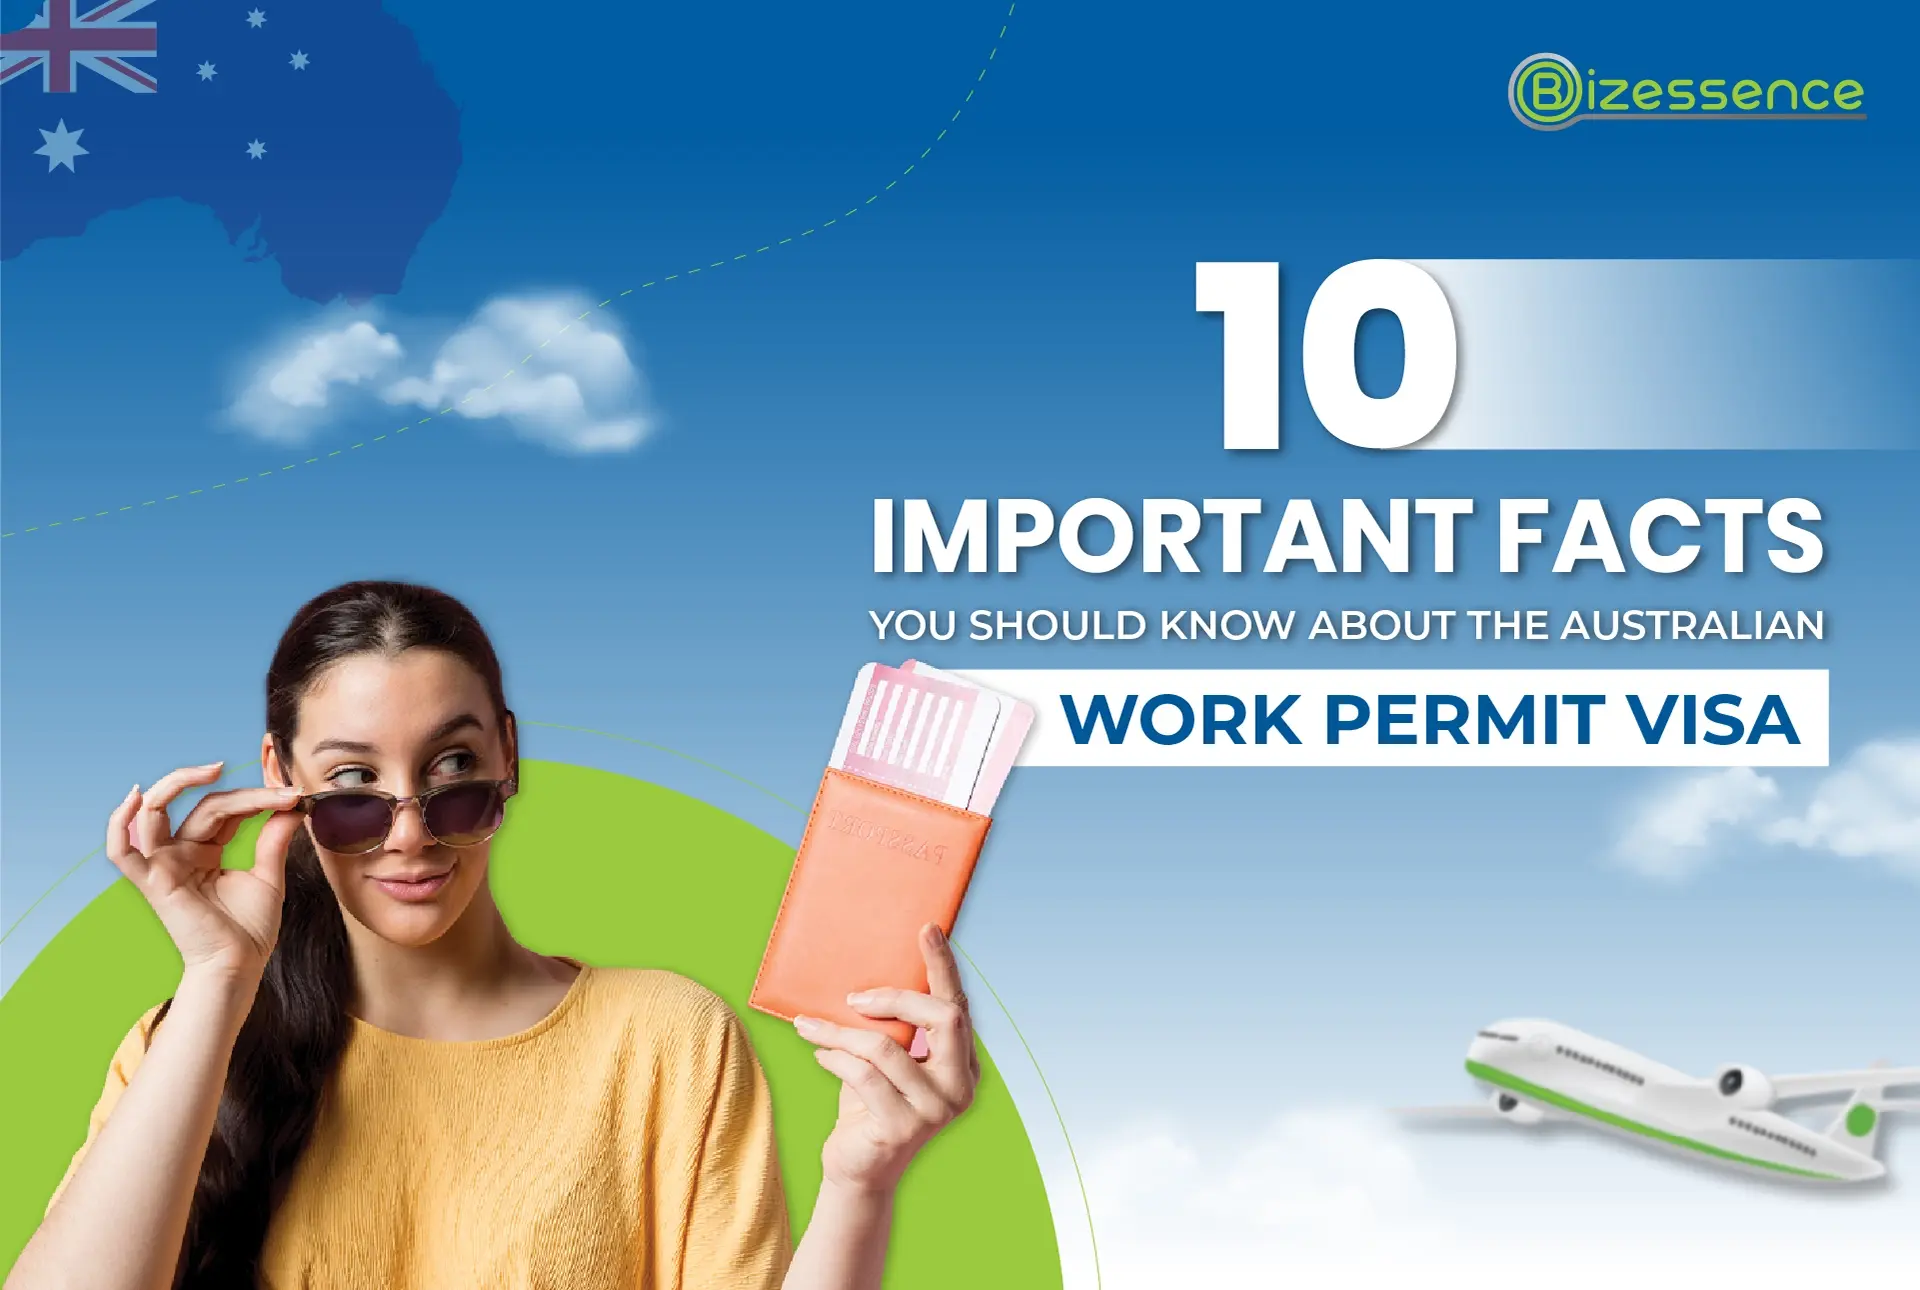 10 Important facts you should know about the Australian Work Permit Visa